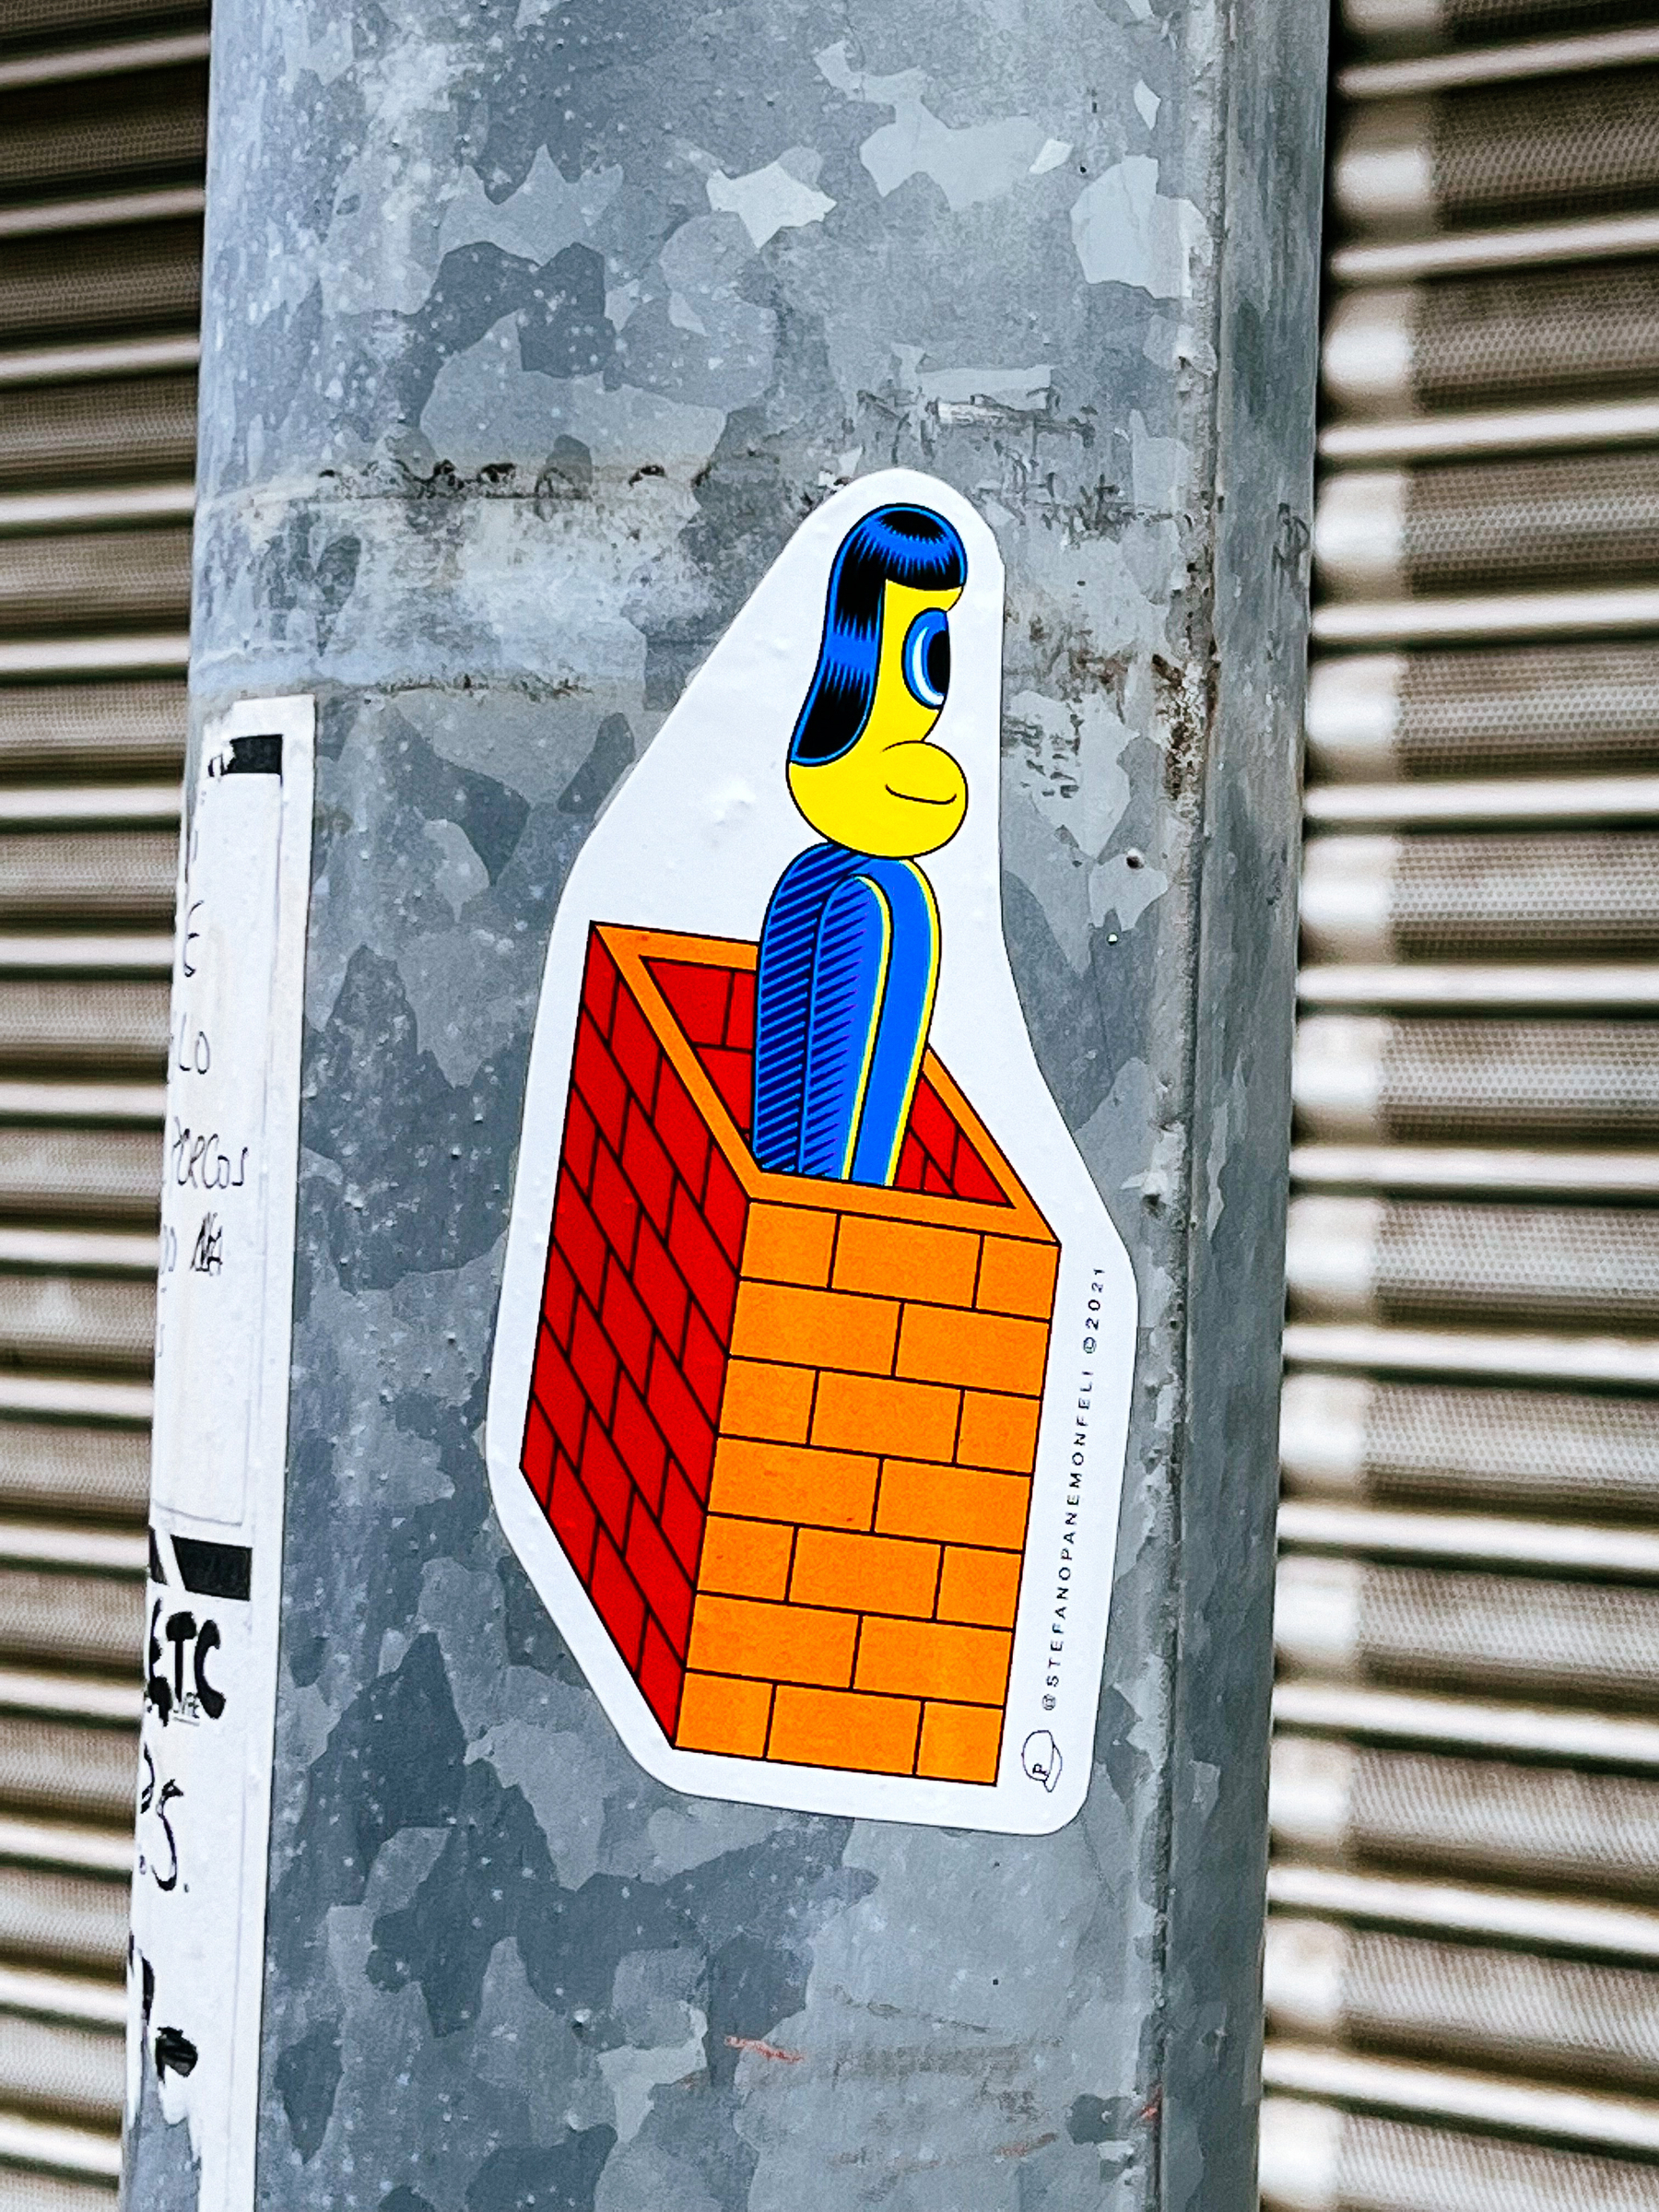 Sticker of a cartoony yellow faced character inside a brick wall. Sorry, can’t describe it much better. 